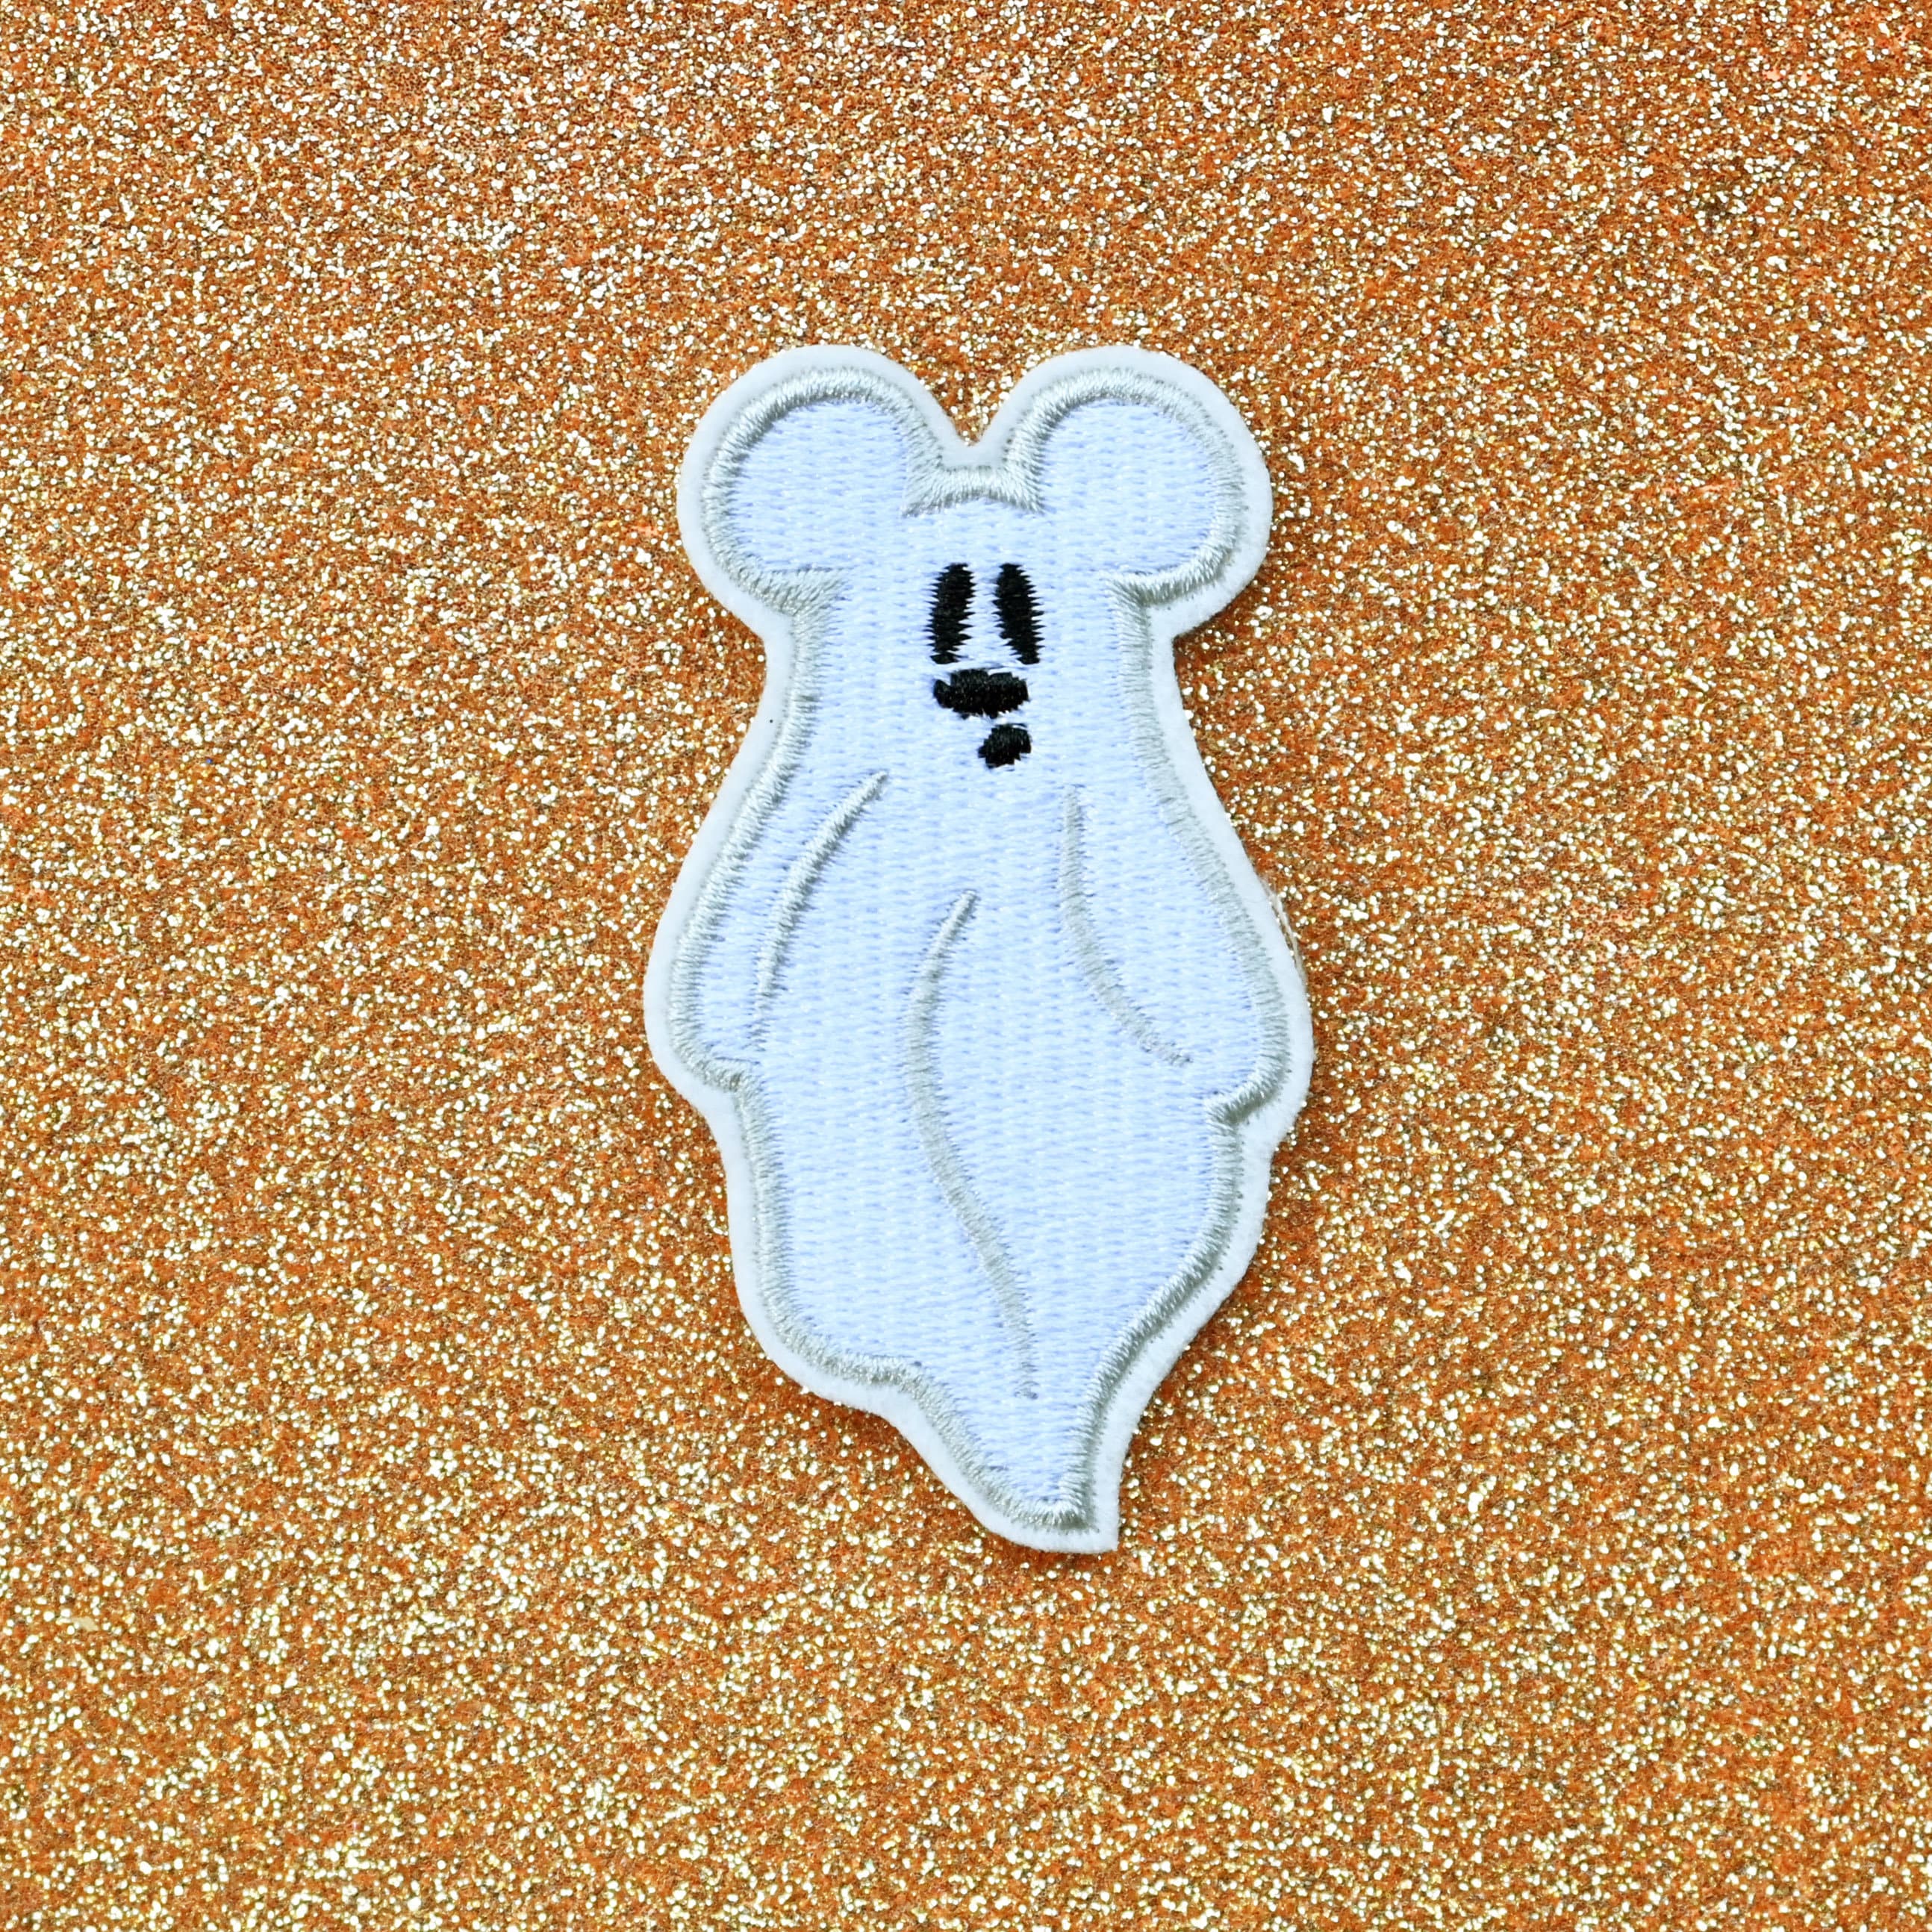 Mickey Ghost Iron-on Patch Mickey Patch Mickey Iron-on 